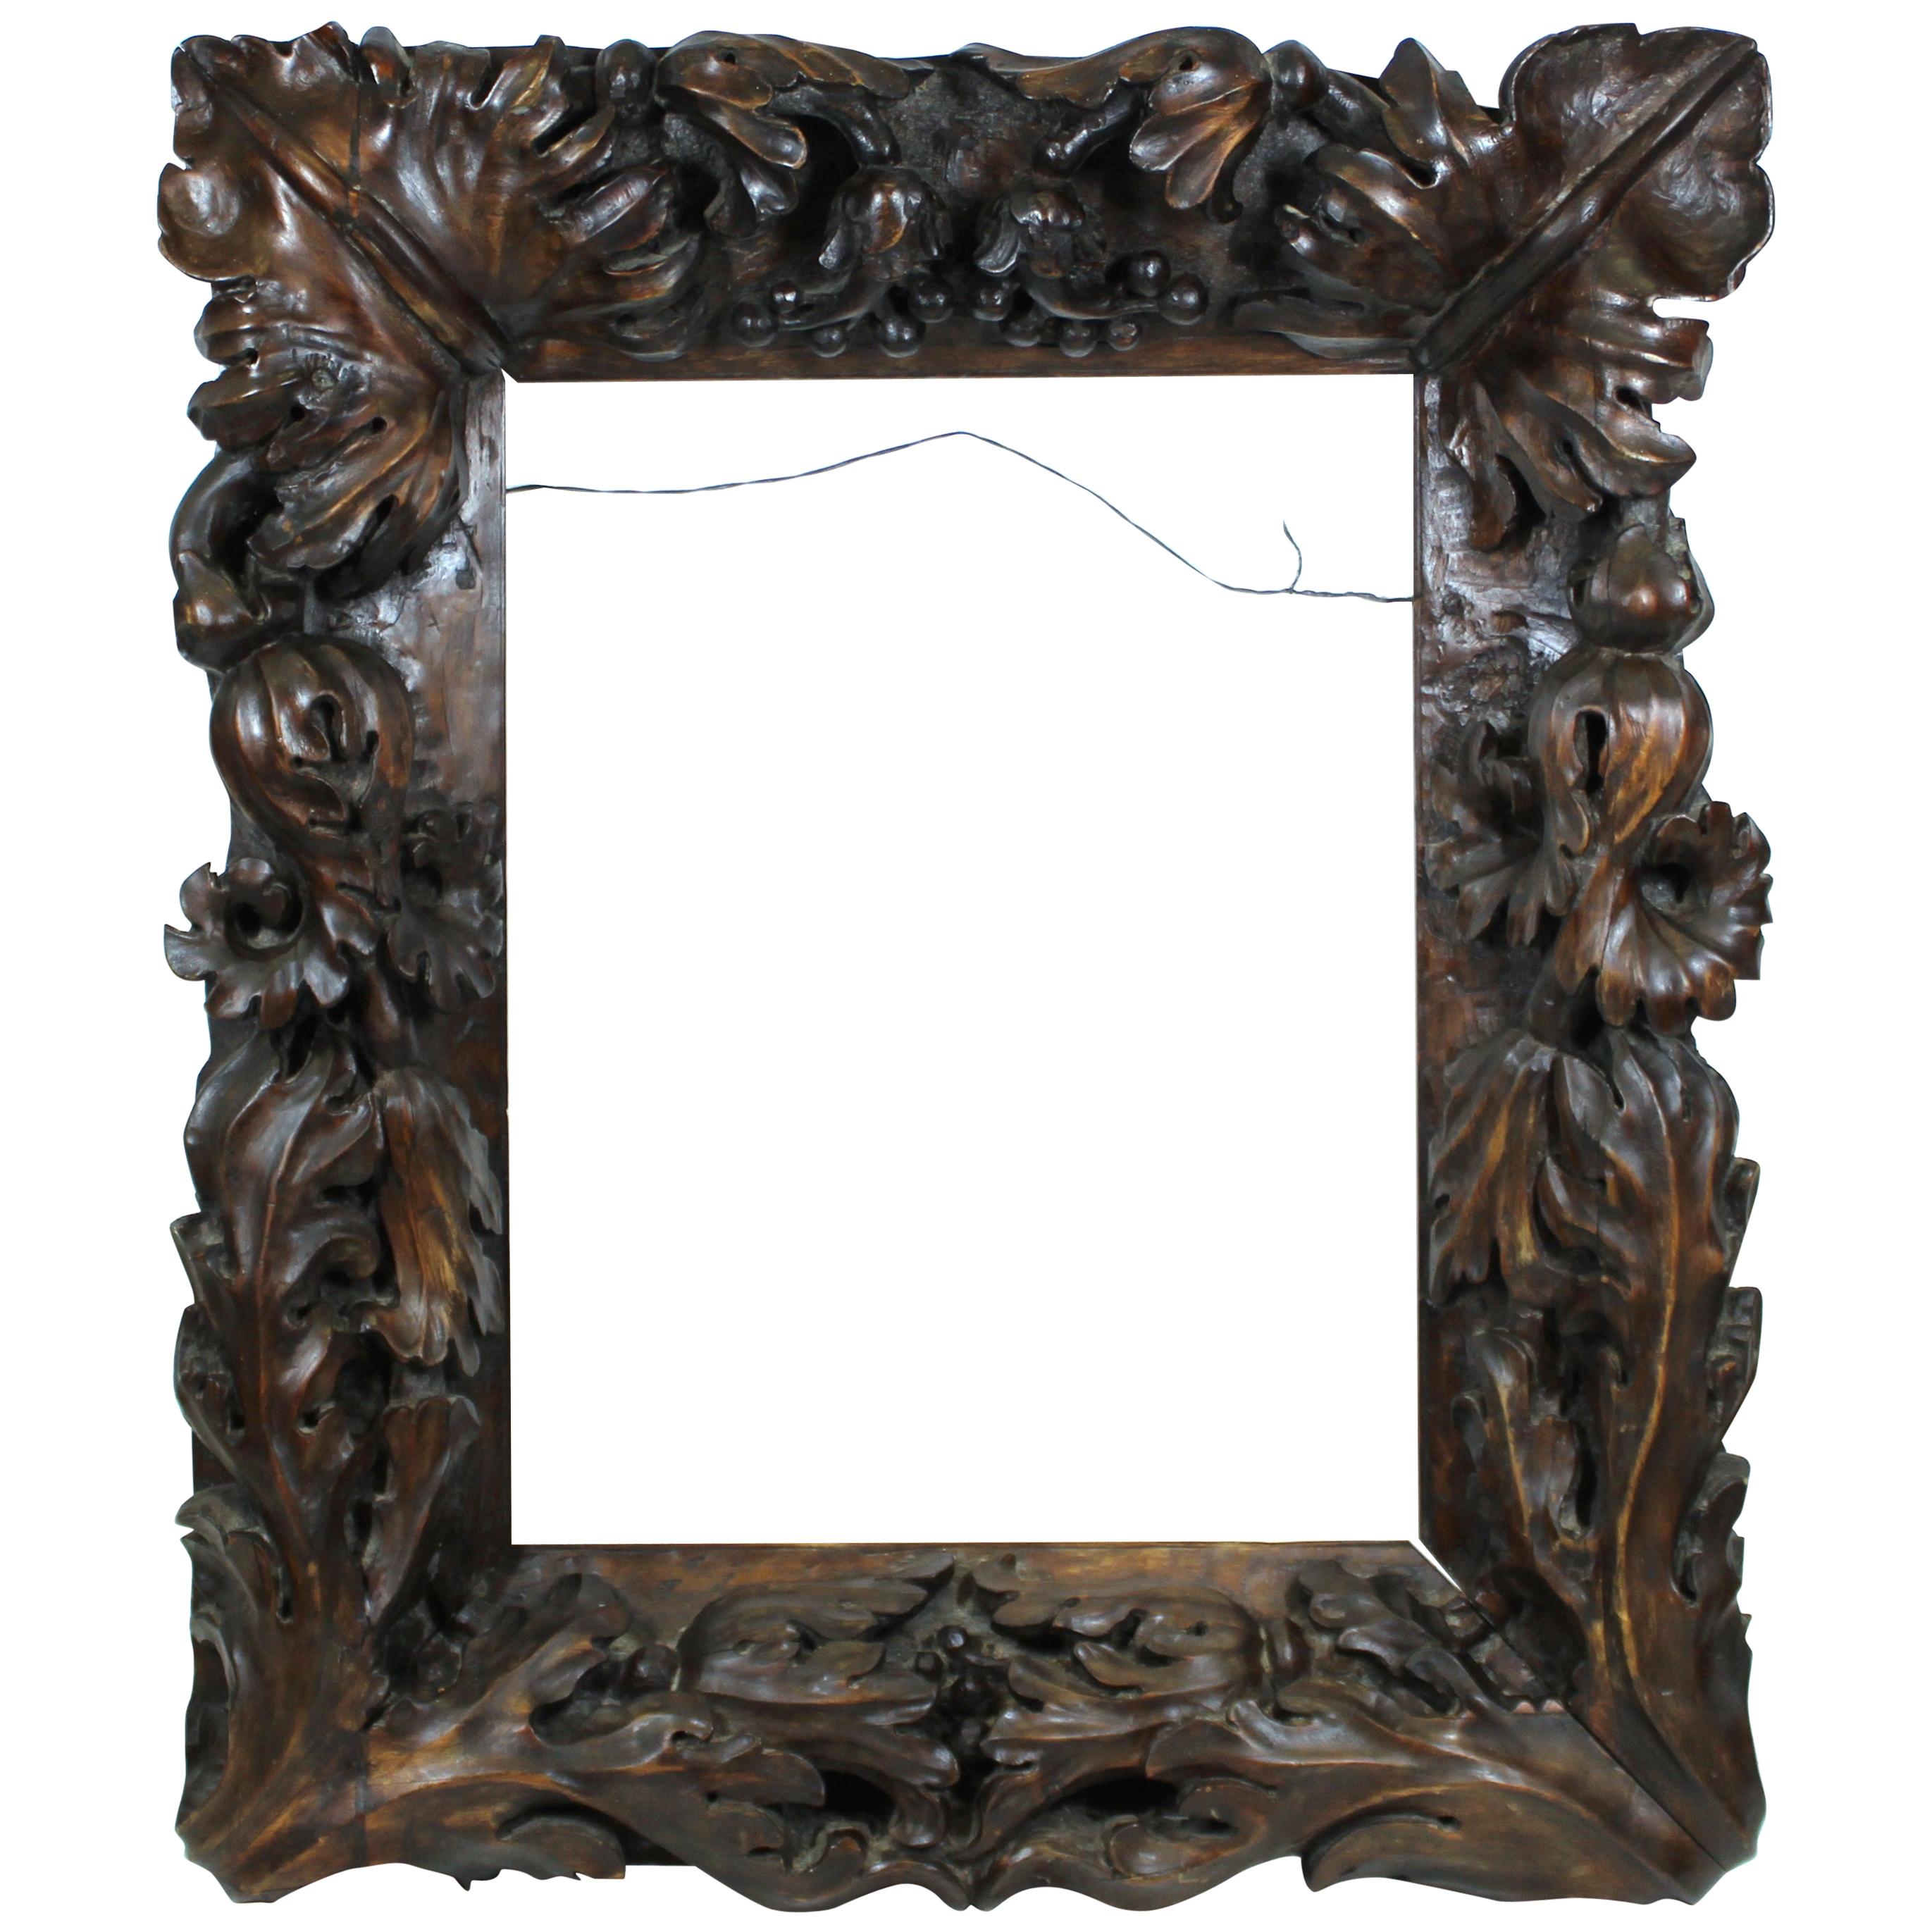 Continental Tropical Baroque Master Carver Wood Frame with Heavy Carved Foliage For Sale